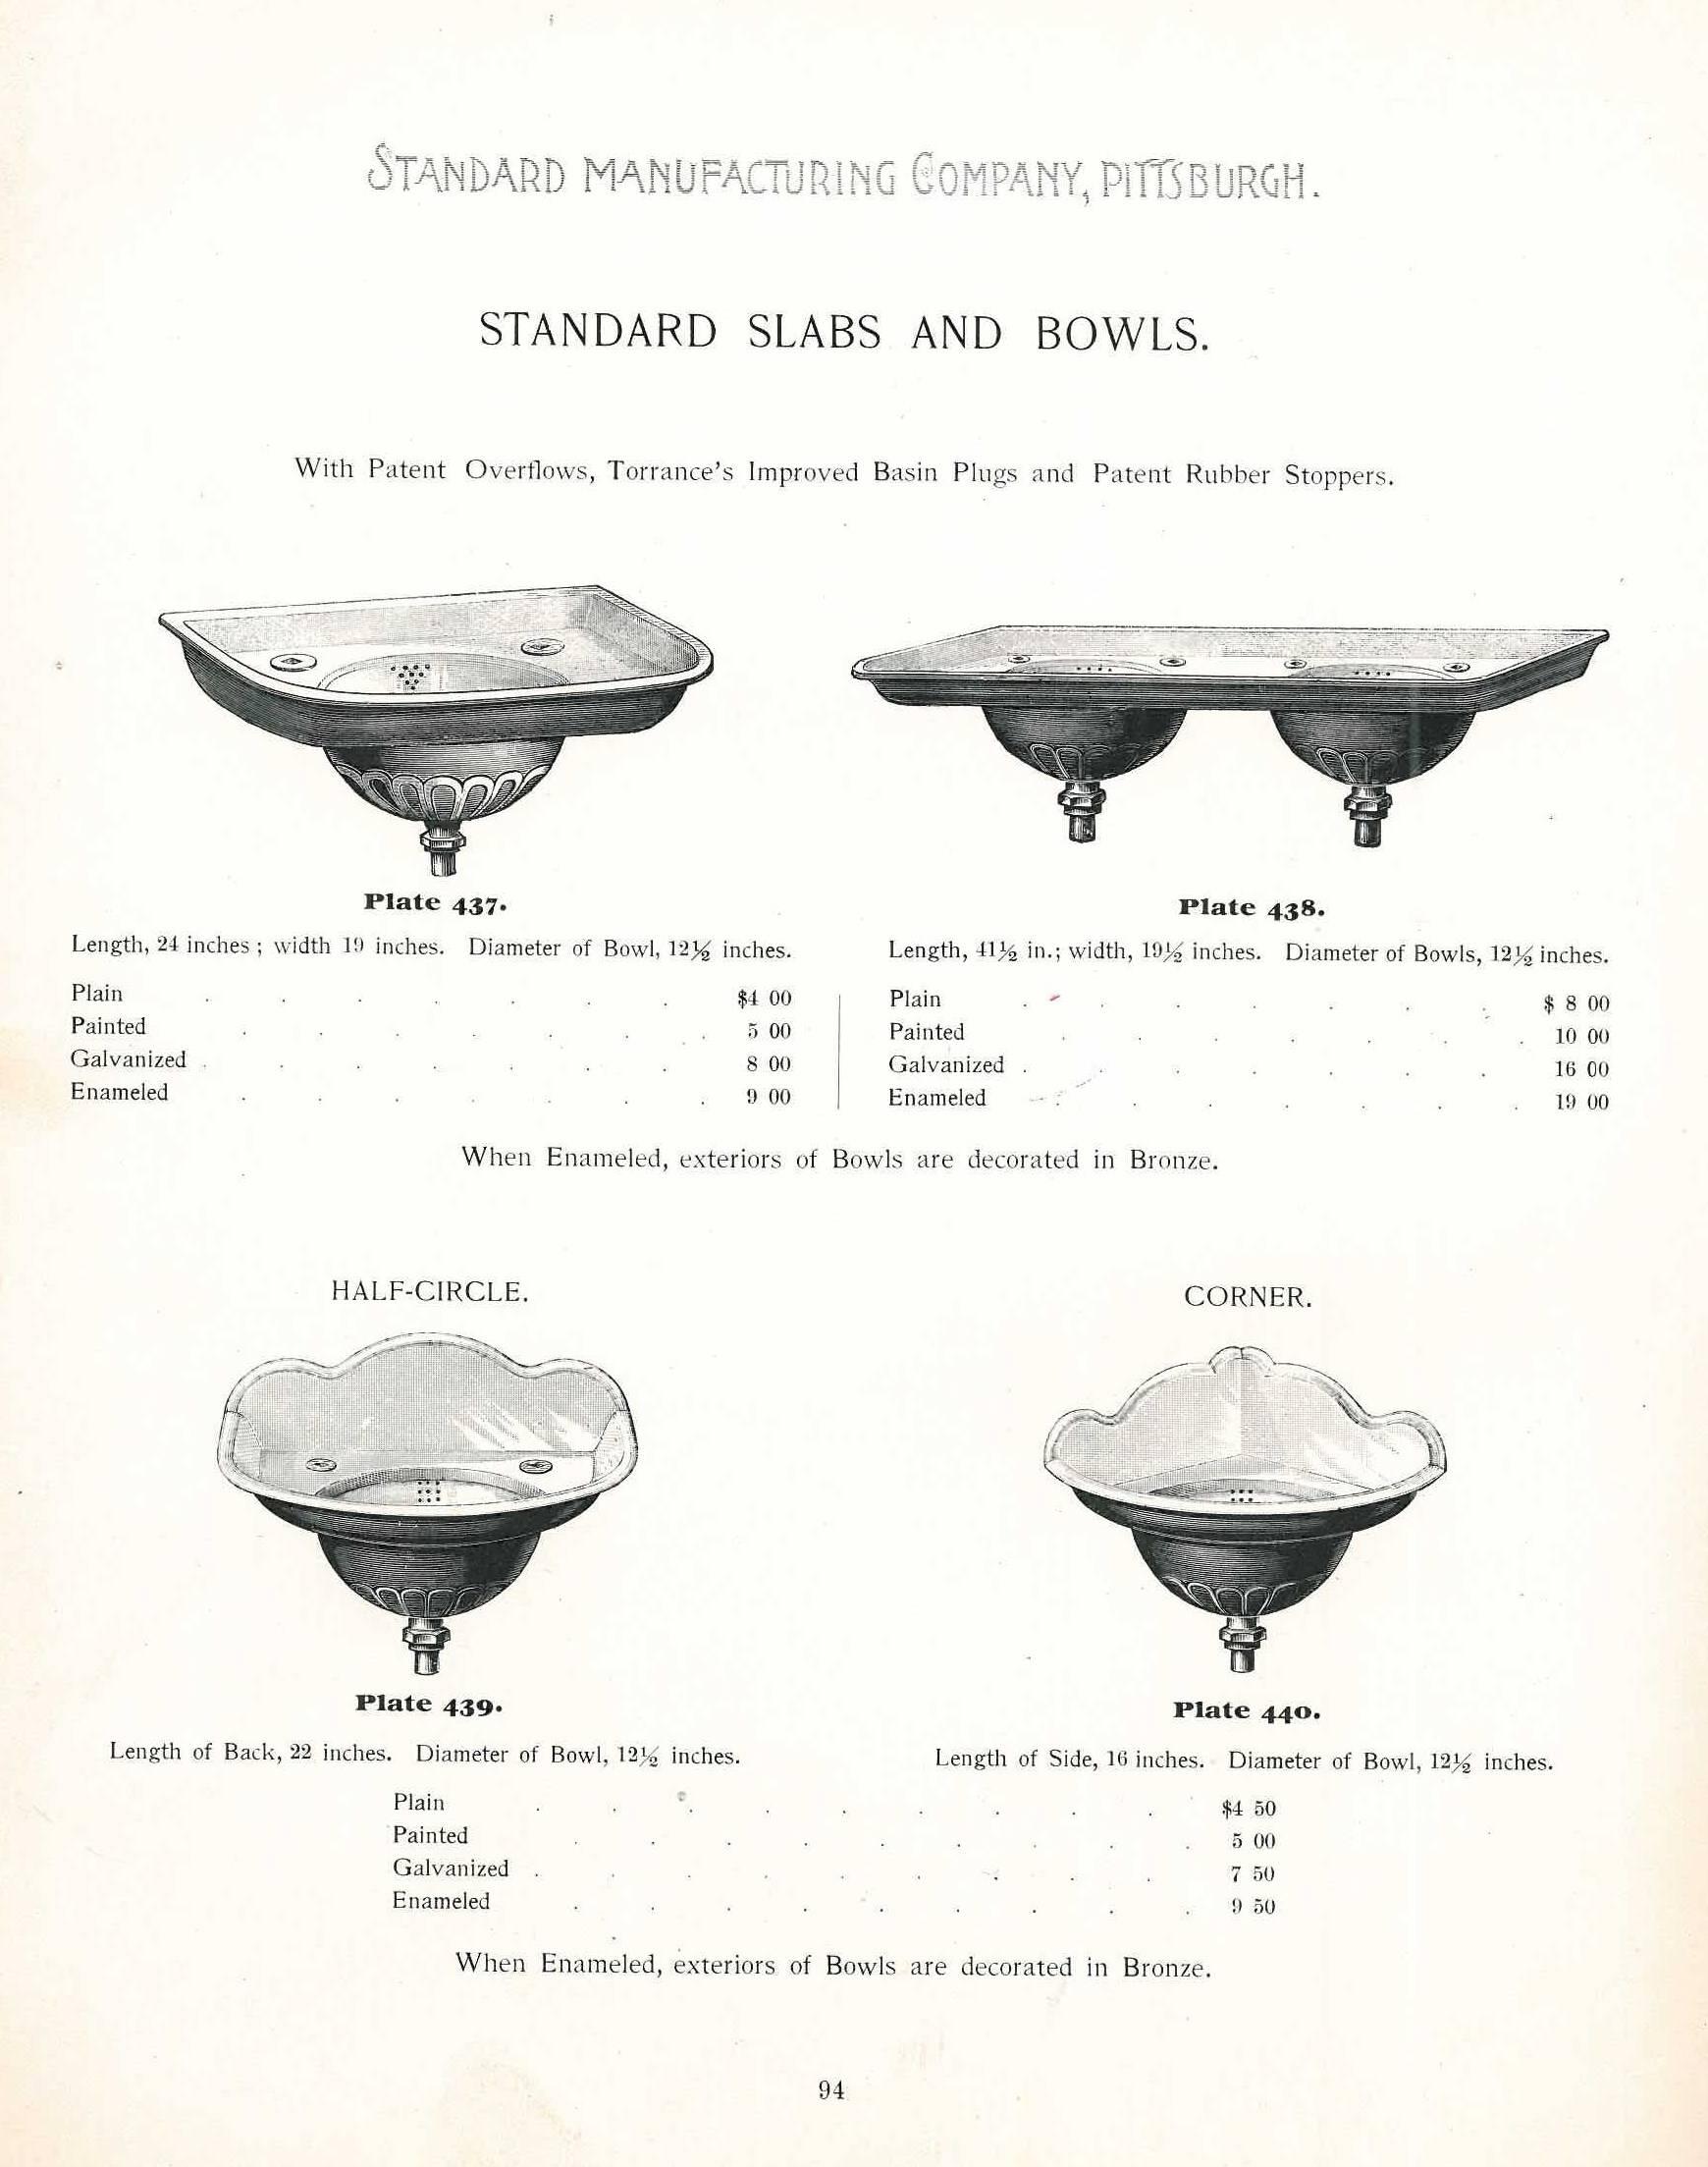 Standard Manufacturing Co. Pittsburgh Catalogue of Sanitary and Plumbing Goods 3